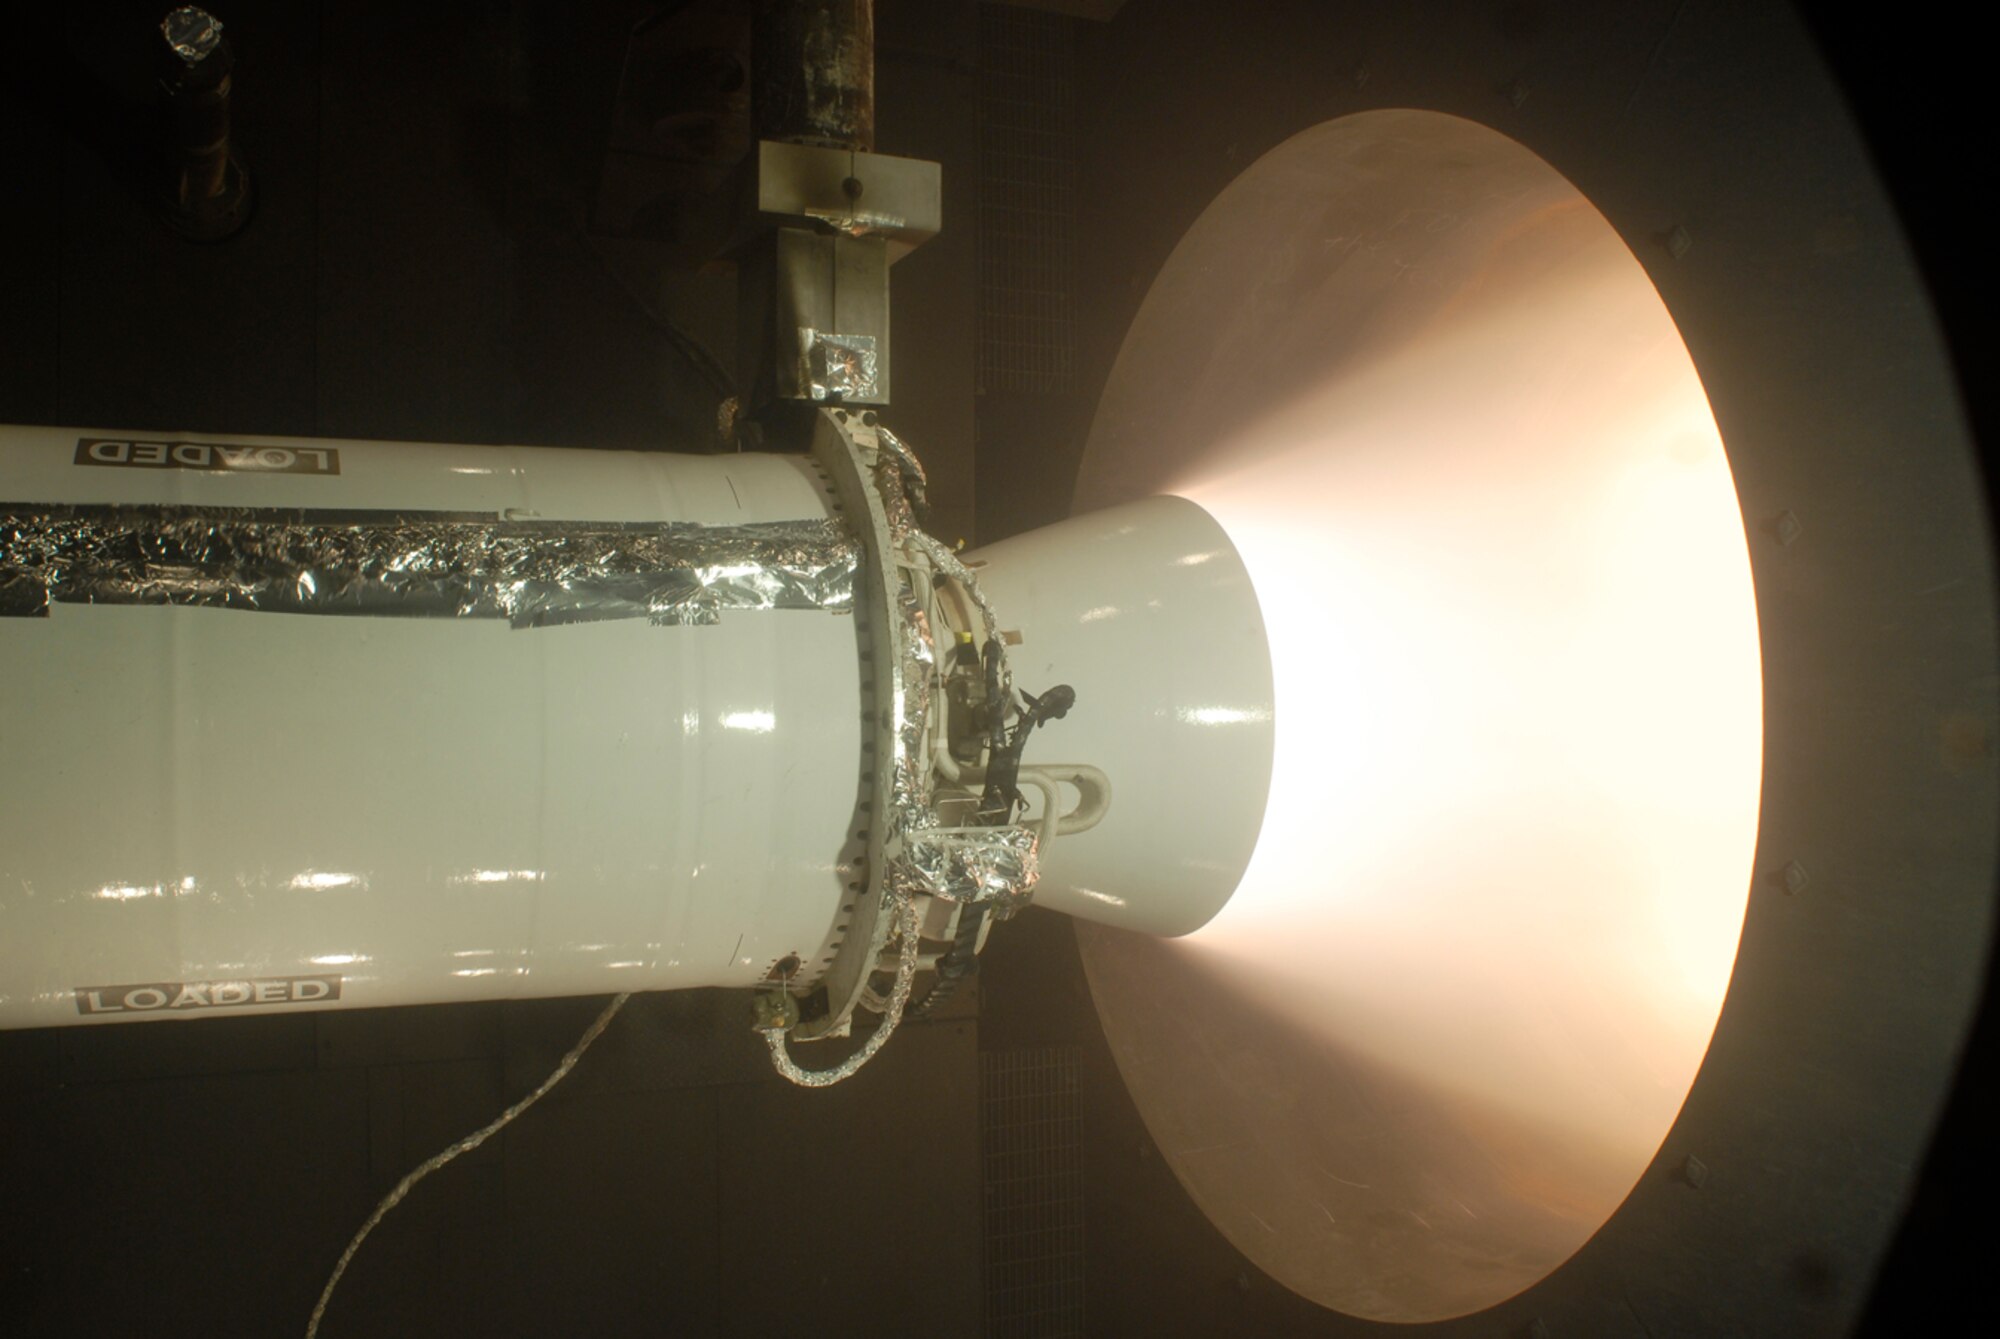 White-hot exhaust spews from the nozzle of the Minuteman Stage 2 motor during testing Jan. 18 in the AEDC J-6 Large Rocket Motor Test Facility. (Photo by Rick Goodfriend)